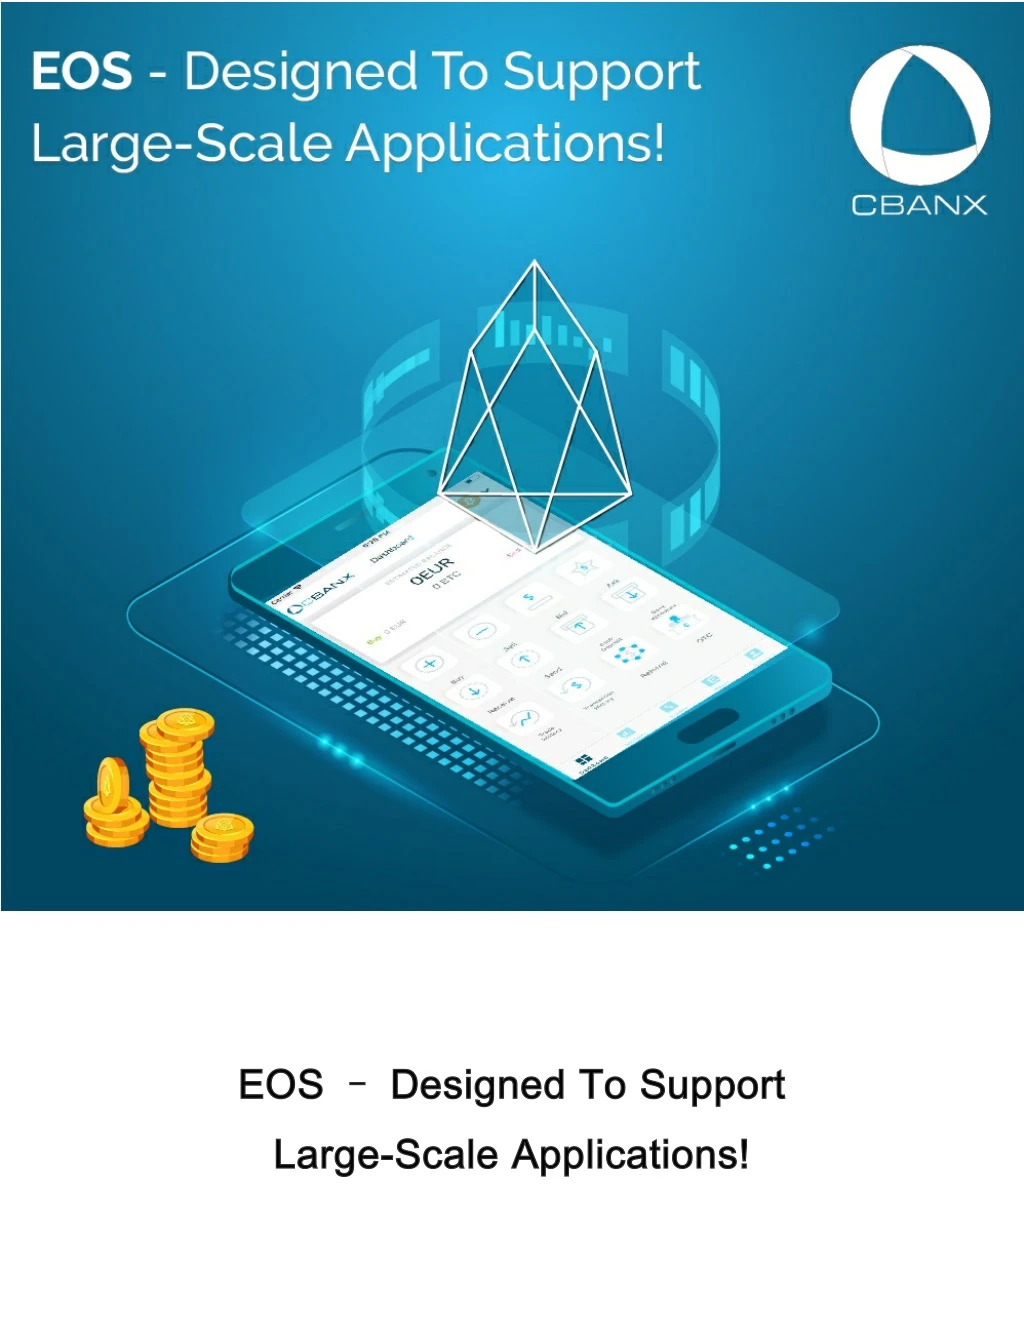 eos eos large scale large scale applications